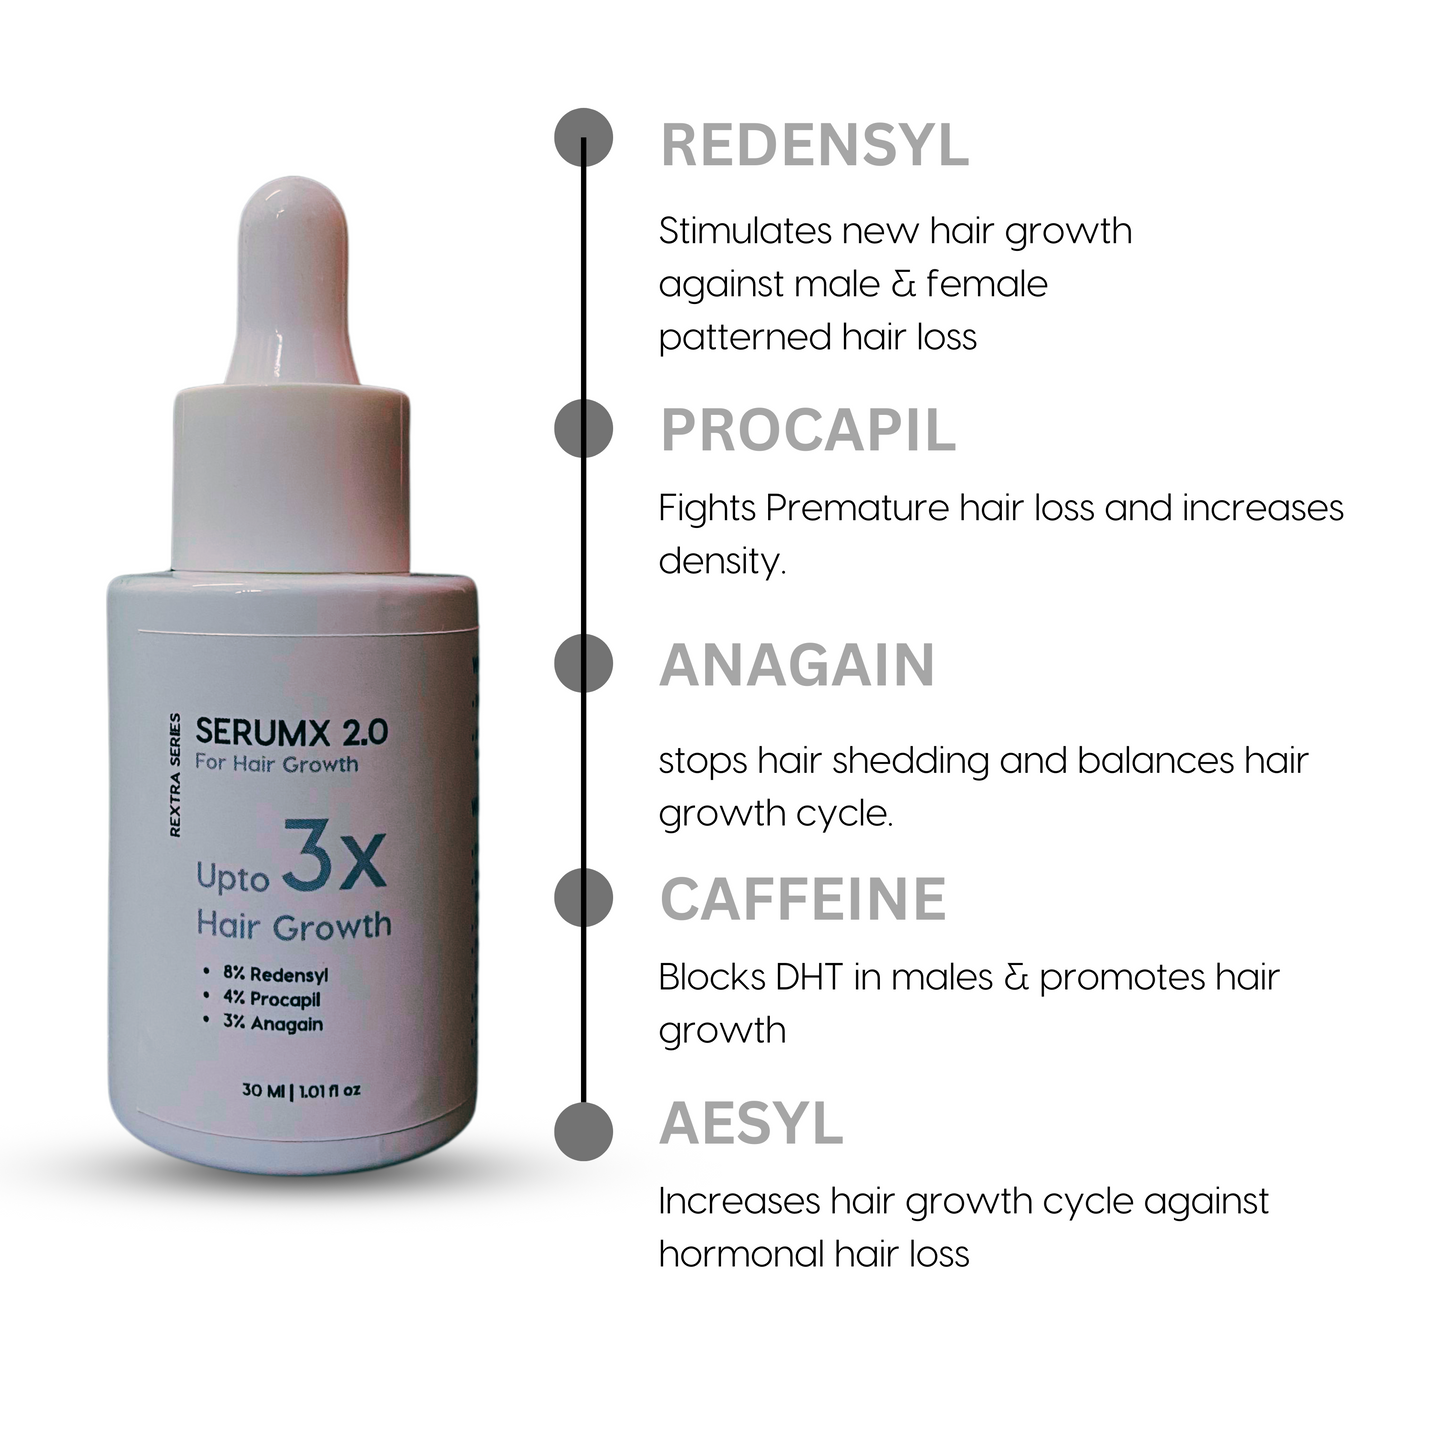 SerumX 2.0 Reconstructed With 8% Micronised Redensyl, 4% Procapil & 3% Anagain | For Hair Growth Upto 3X | 30 ML